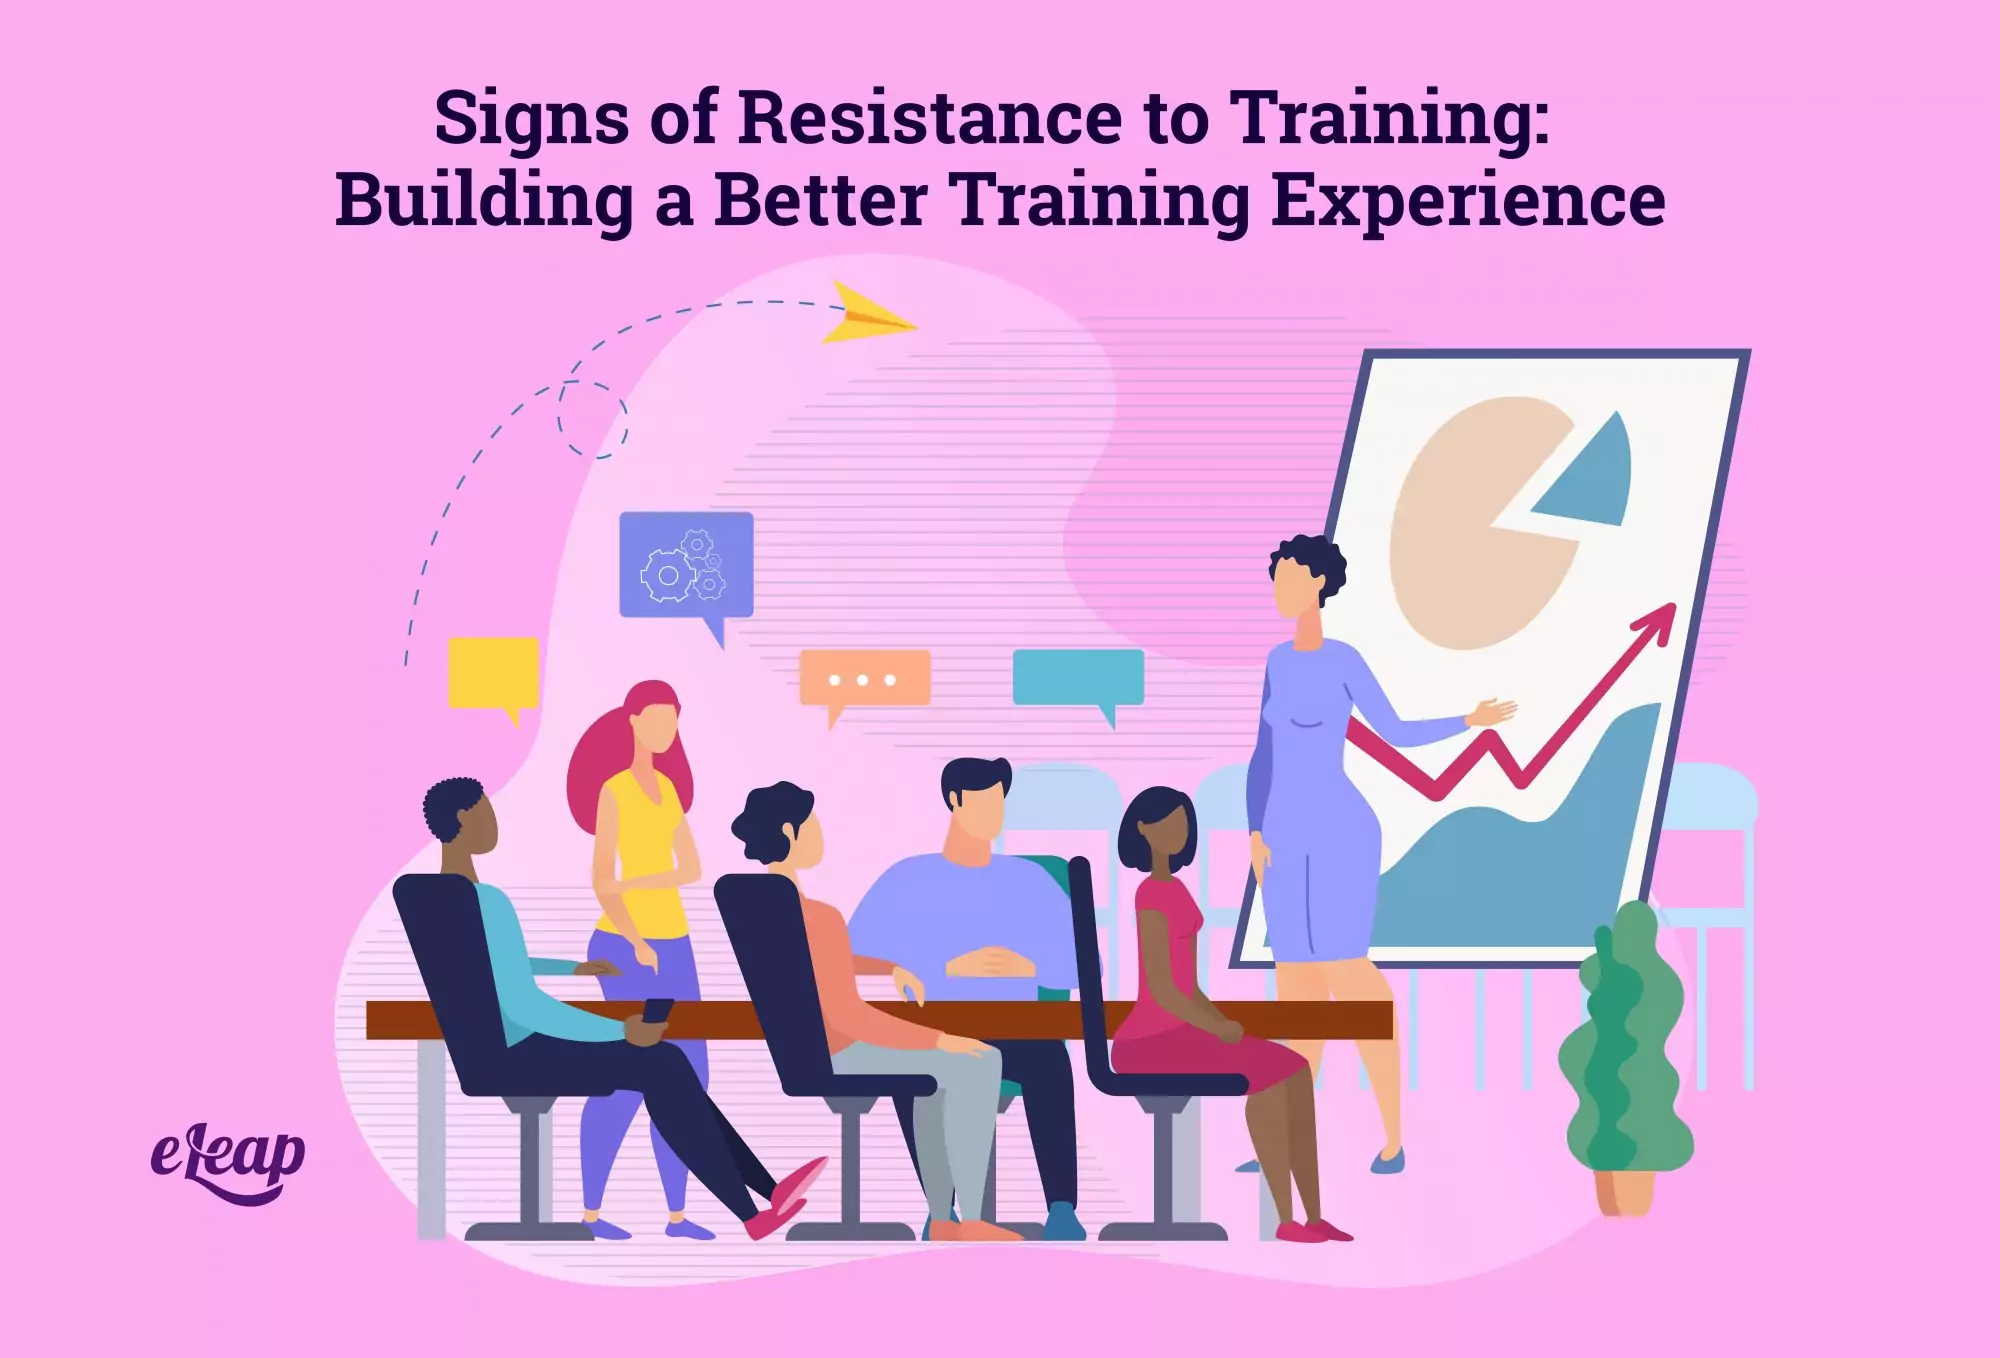 Signs of Resistance to Training: Building a Better Training Experience